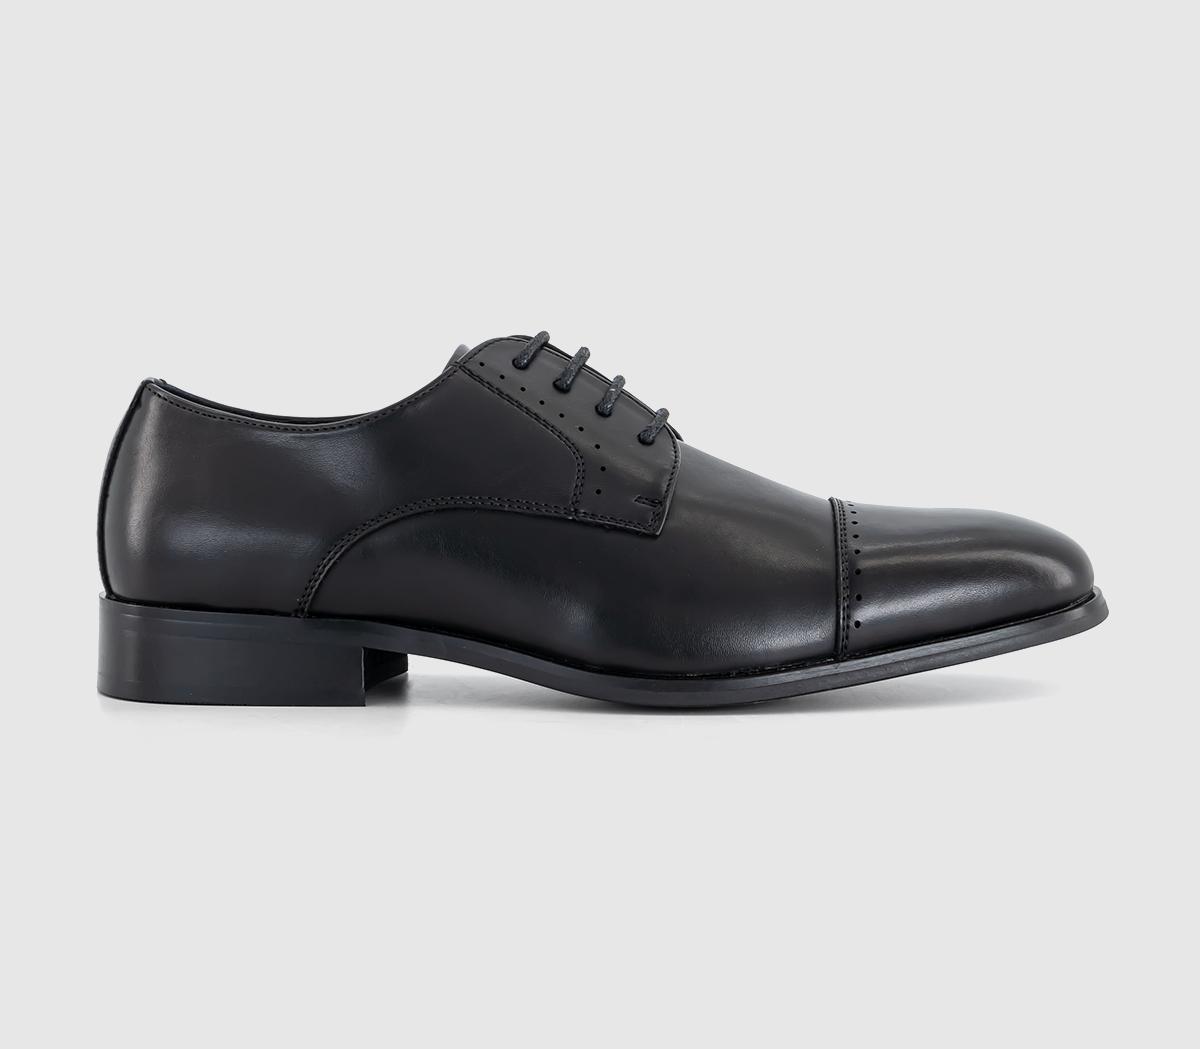 OFFICEMontreal Toe Cap Derby ShoesBlack